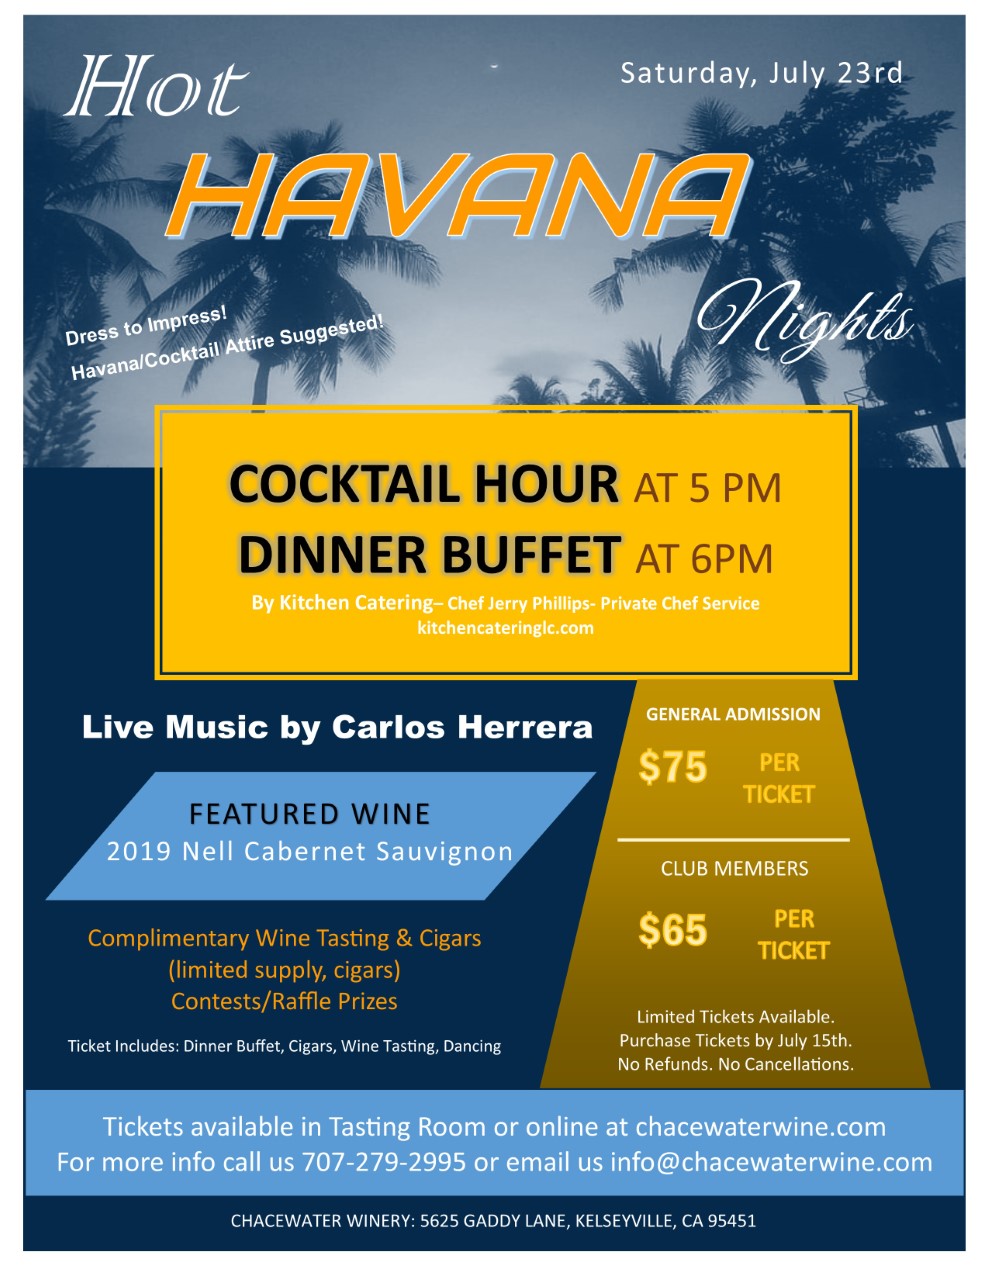 Product Image for Hot Havana Nights - Member 